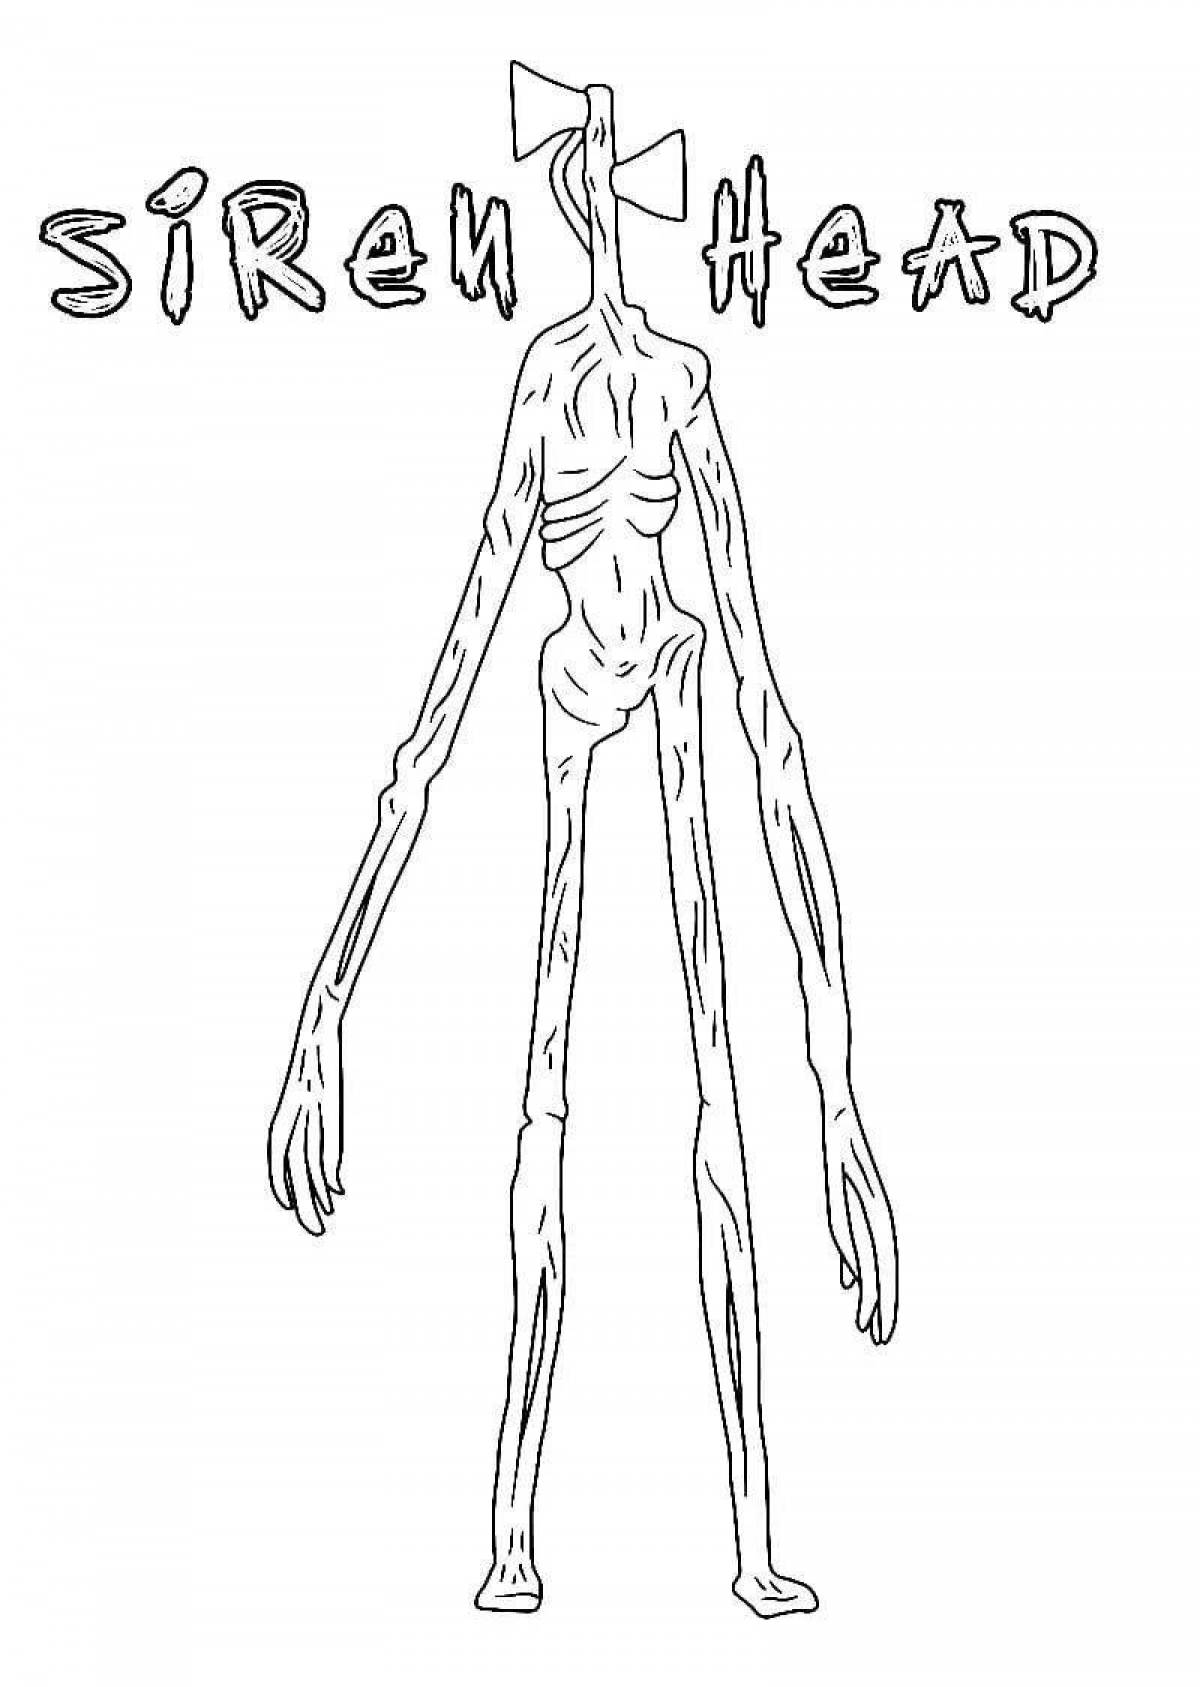 Amazing siren head page for kids